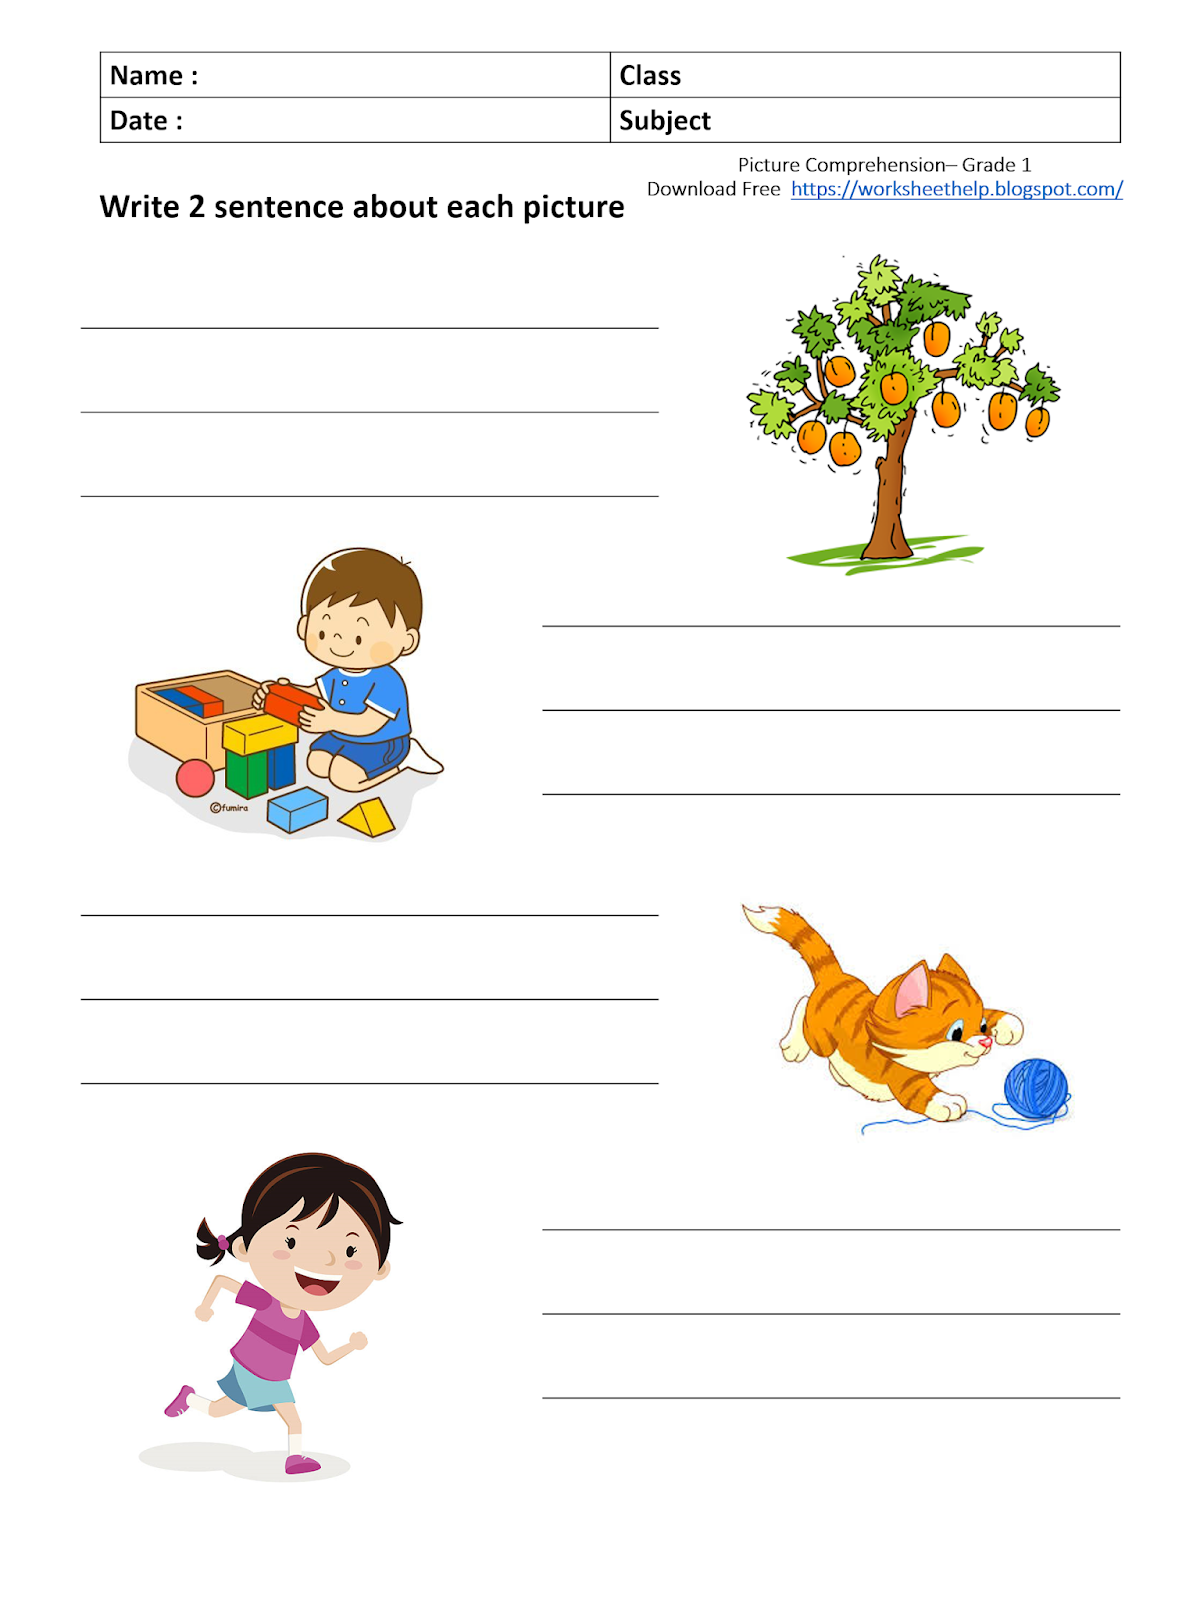 picture-composition-worksheet-grade-1-multiple1-clipart-creationz